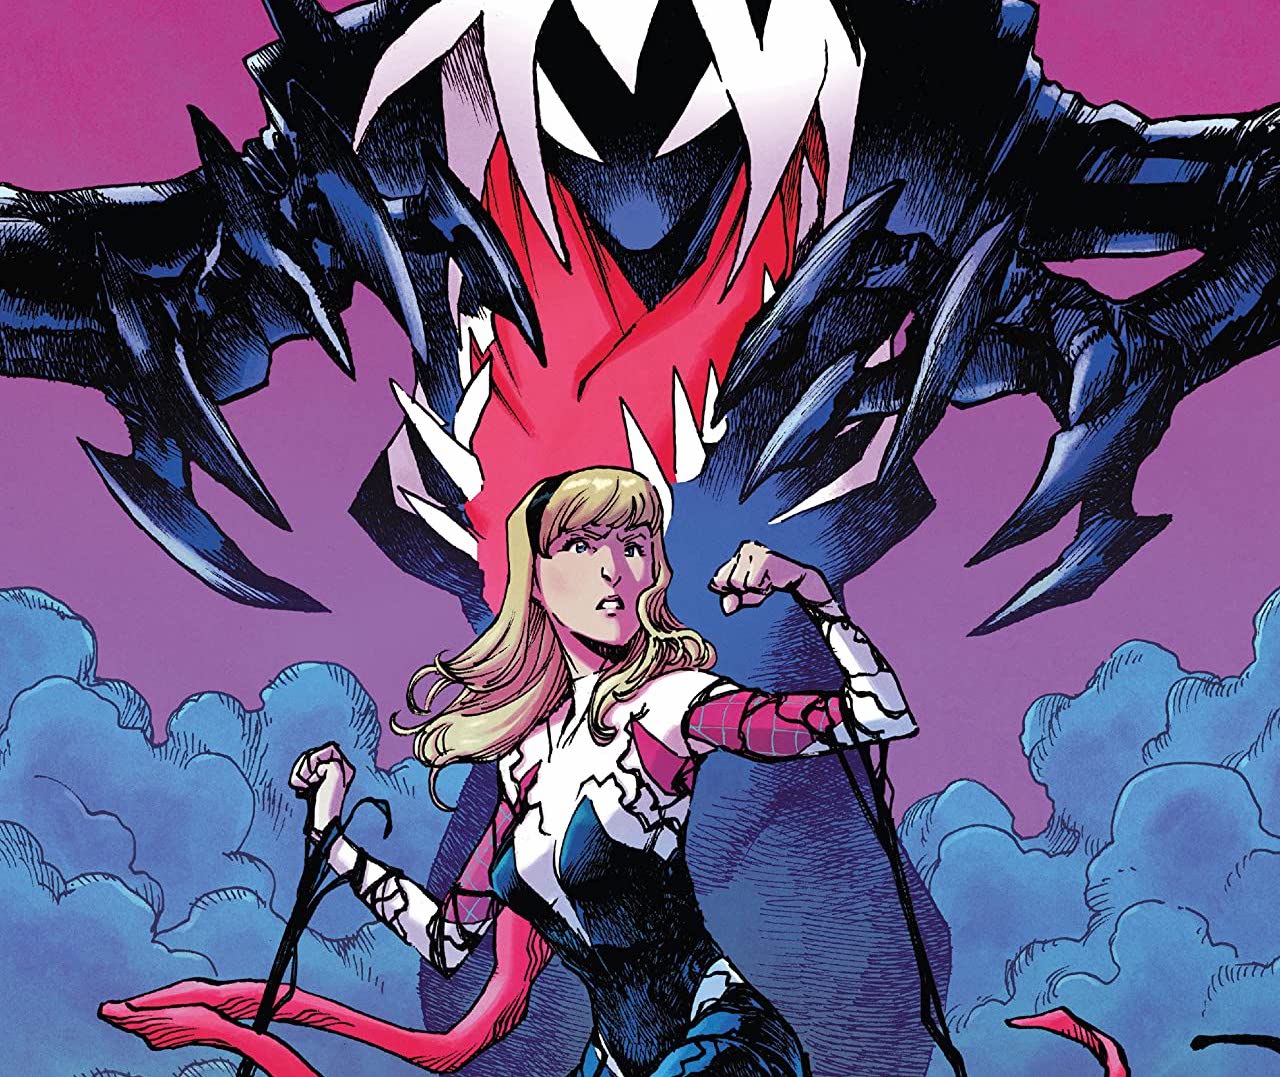 Ghost-Spider #9 review: Intriguing character drama